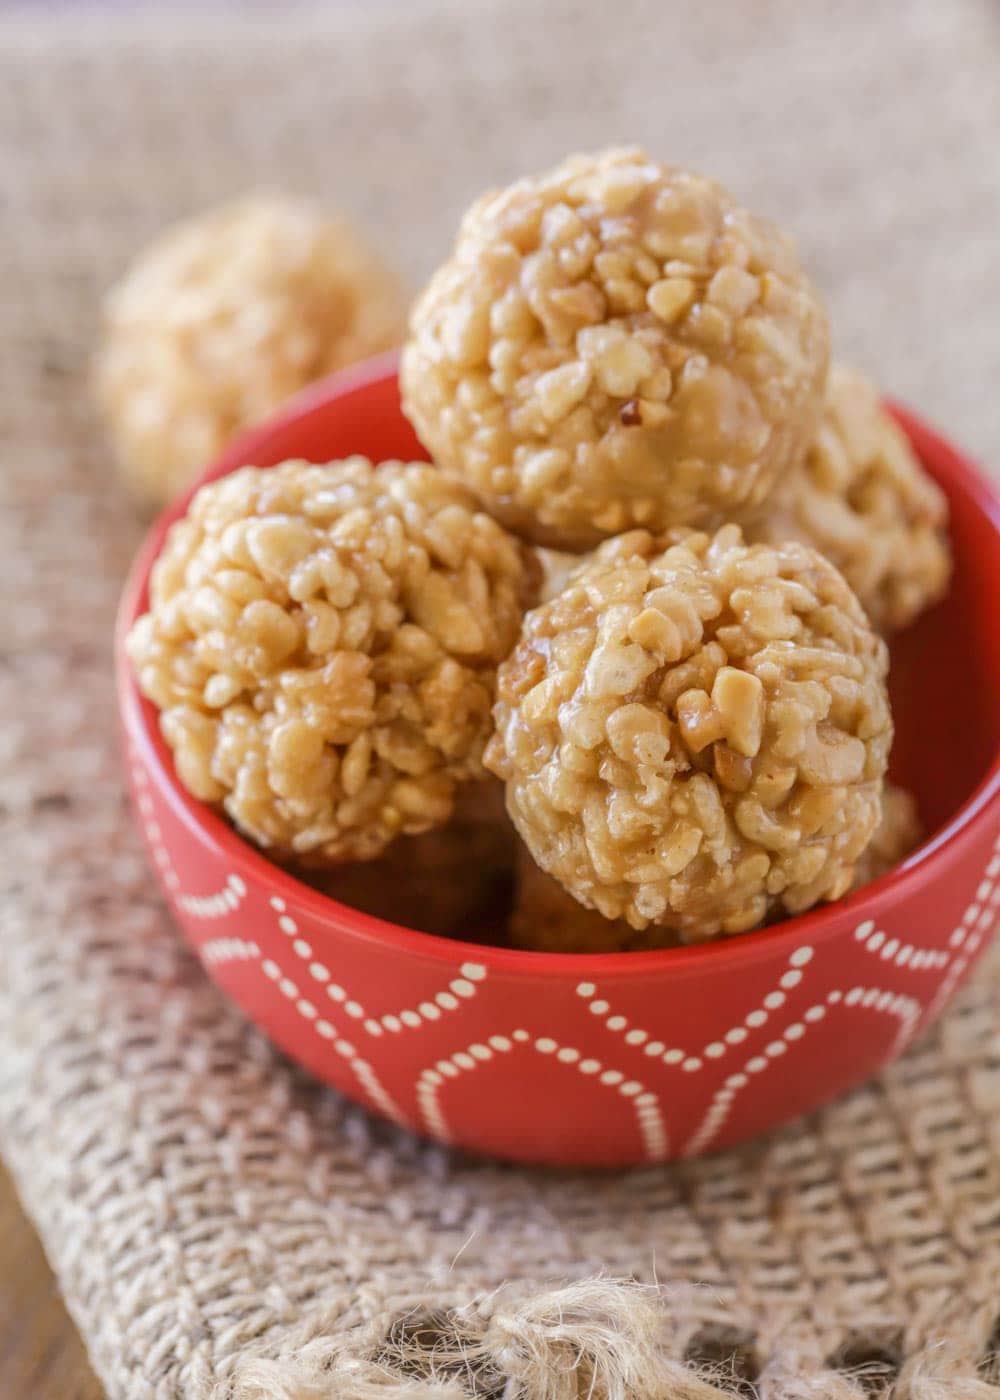 Peanut butter balls with Rice Krispies